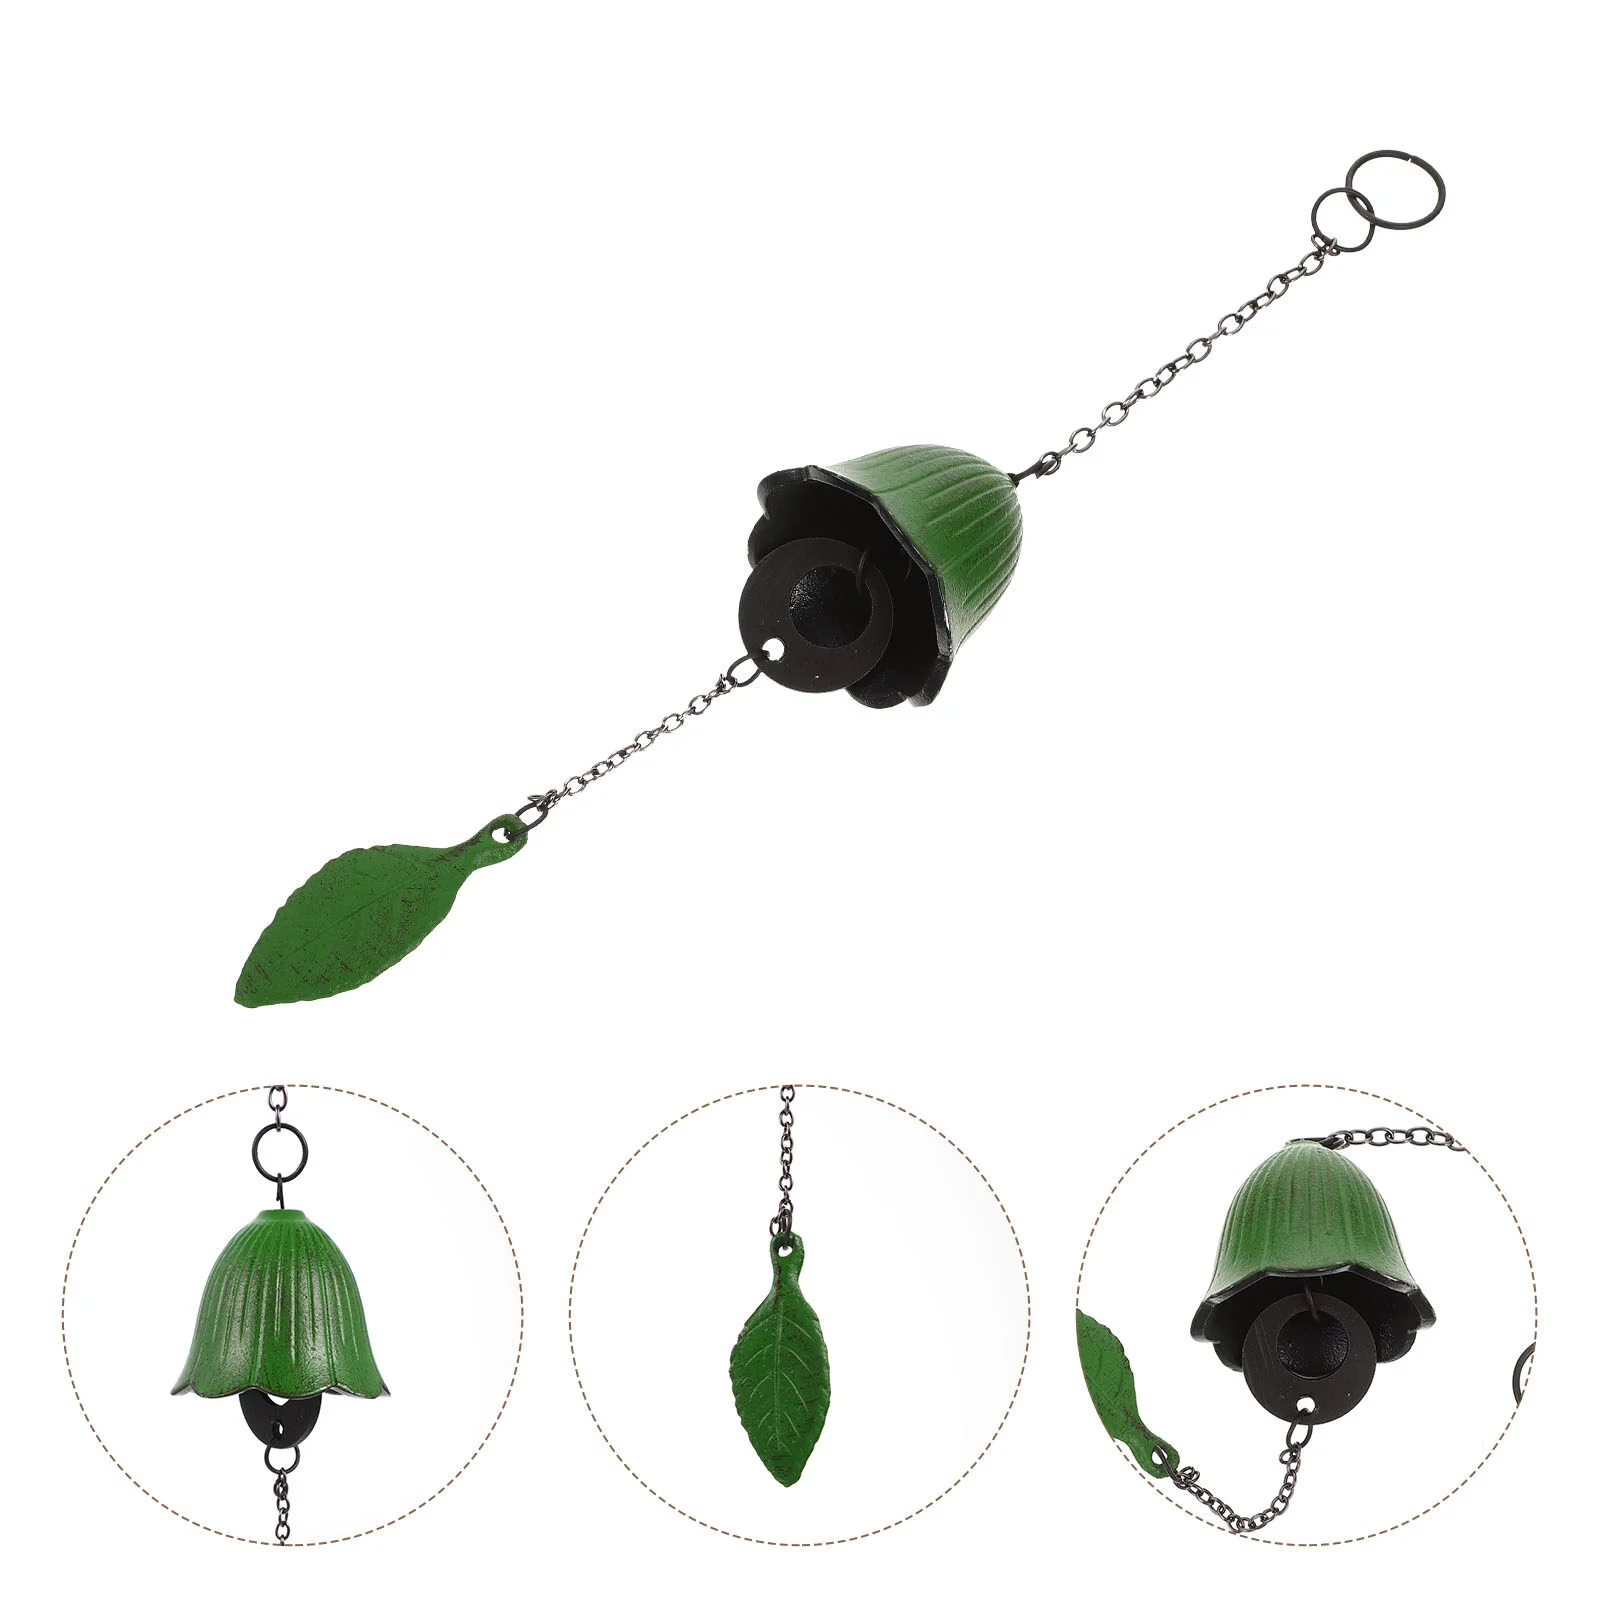 

Rearview Mirror Car Trim Retro Wind Chime Yard Bell Pendant Iron Simple Cast Fortune Hanging Leaf-shaped Balcony Decor